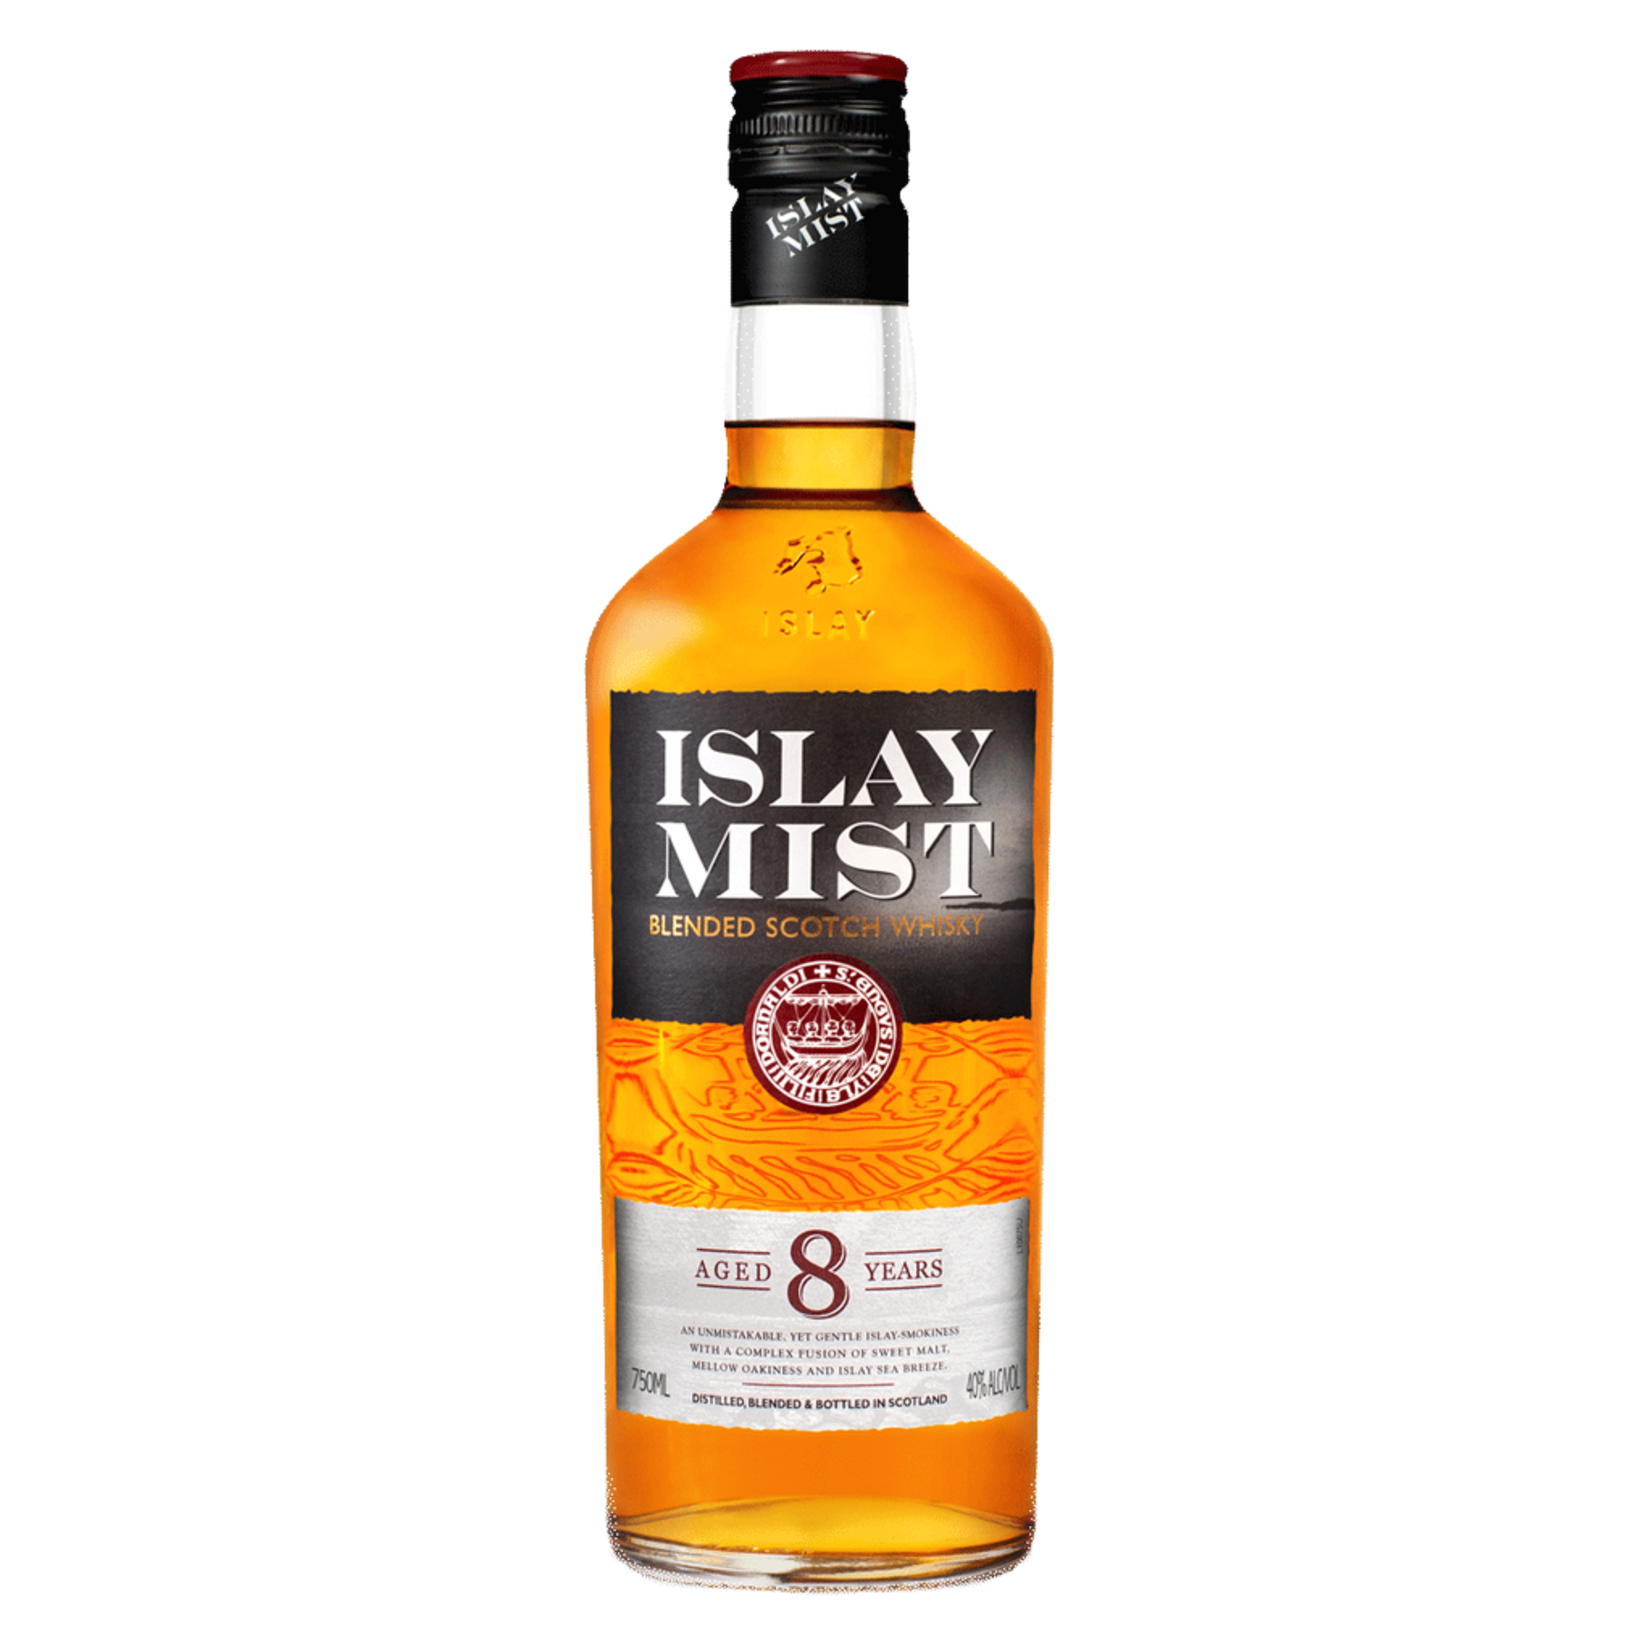 Spirits Islay Mist 8 Year Old Blended Scotch Whisky